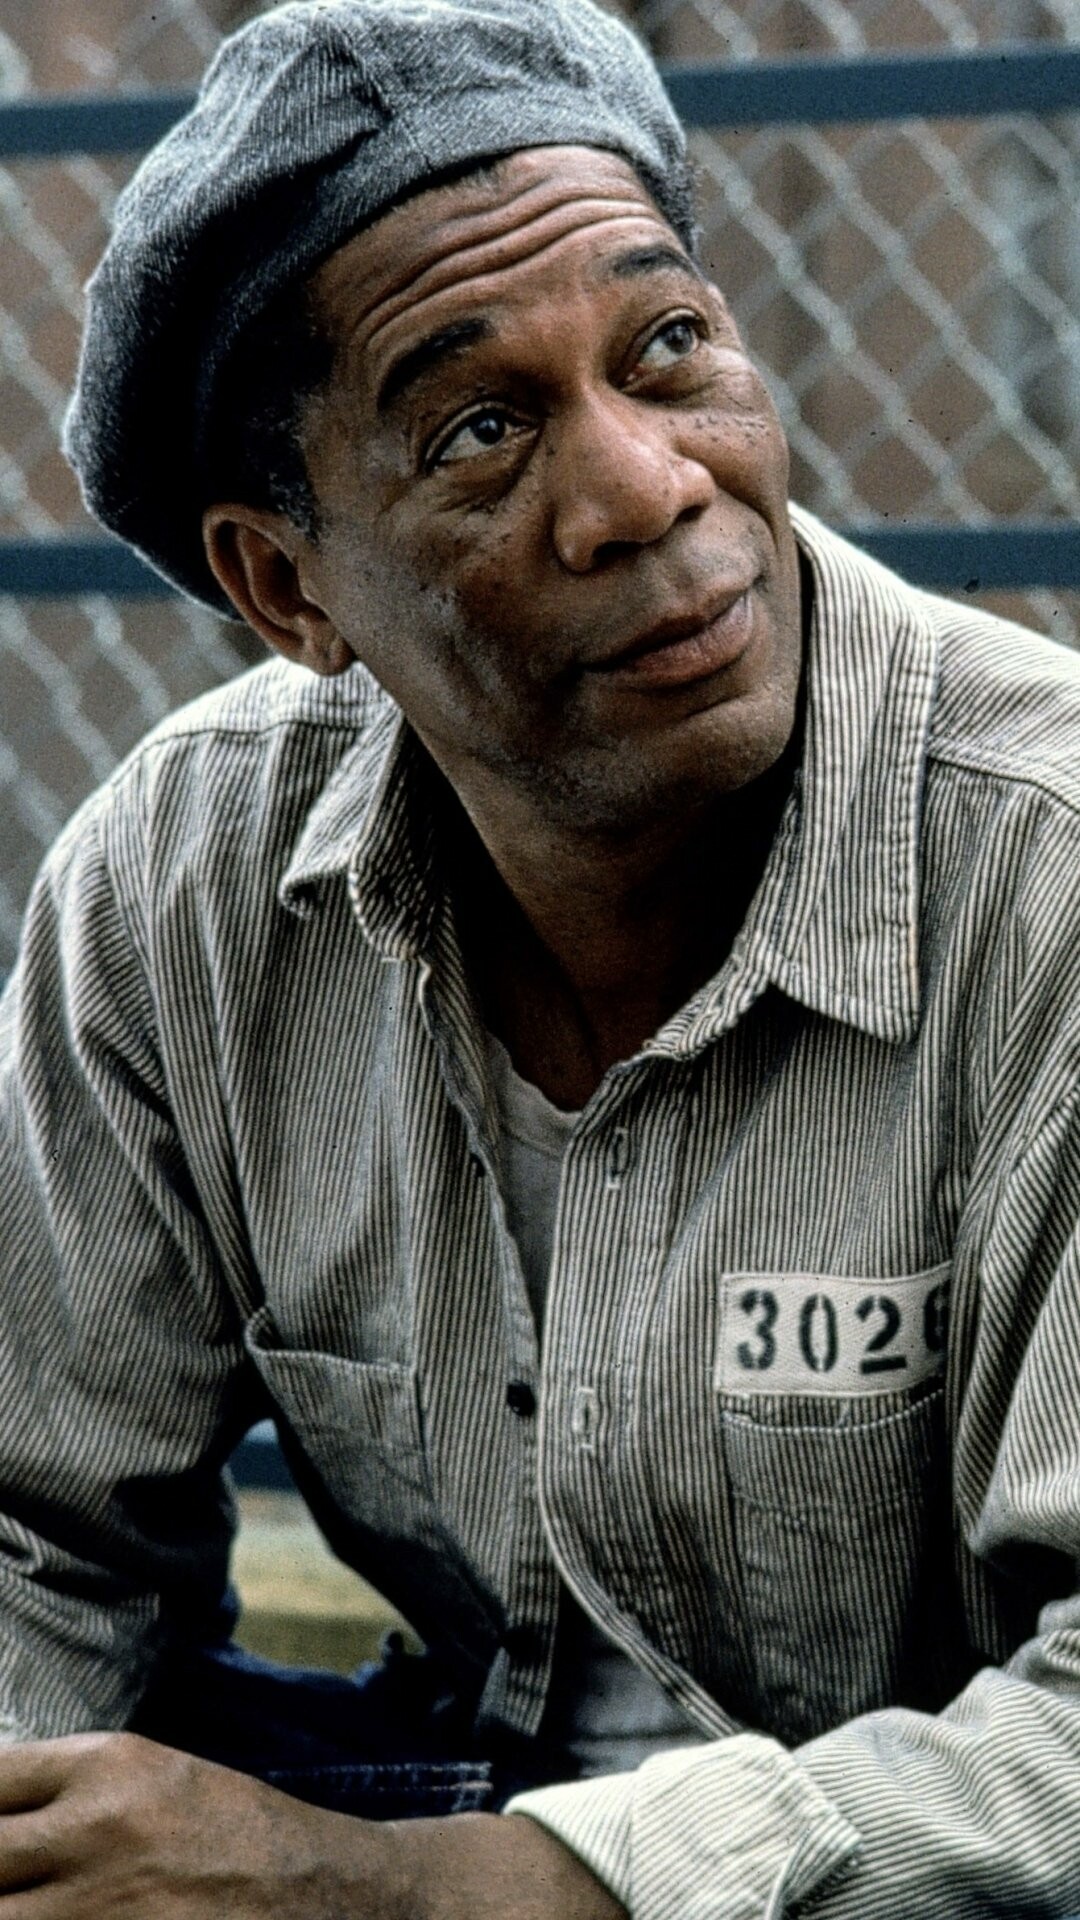 The Shawshank Redemption: Red, a longtime inmate at Shawshank who can smuggle anything in. 1080x1920 Full HD Wallpaper.